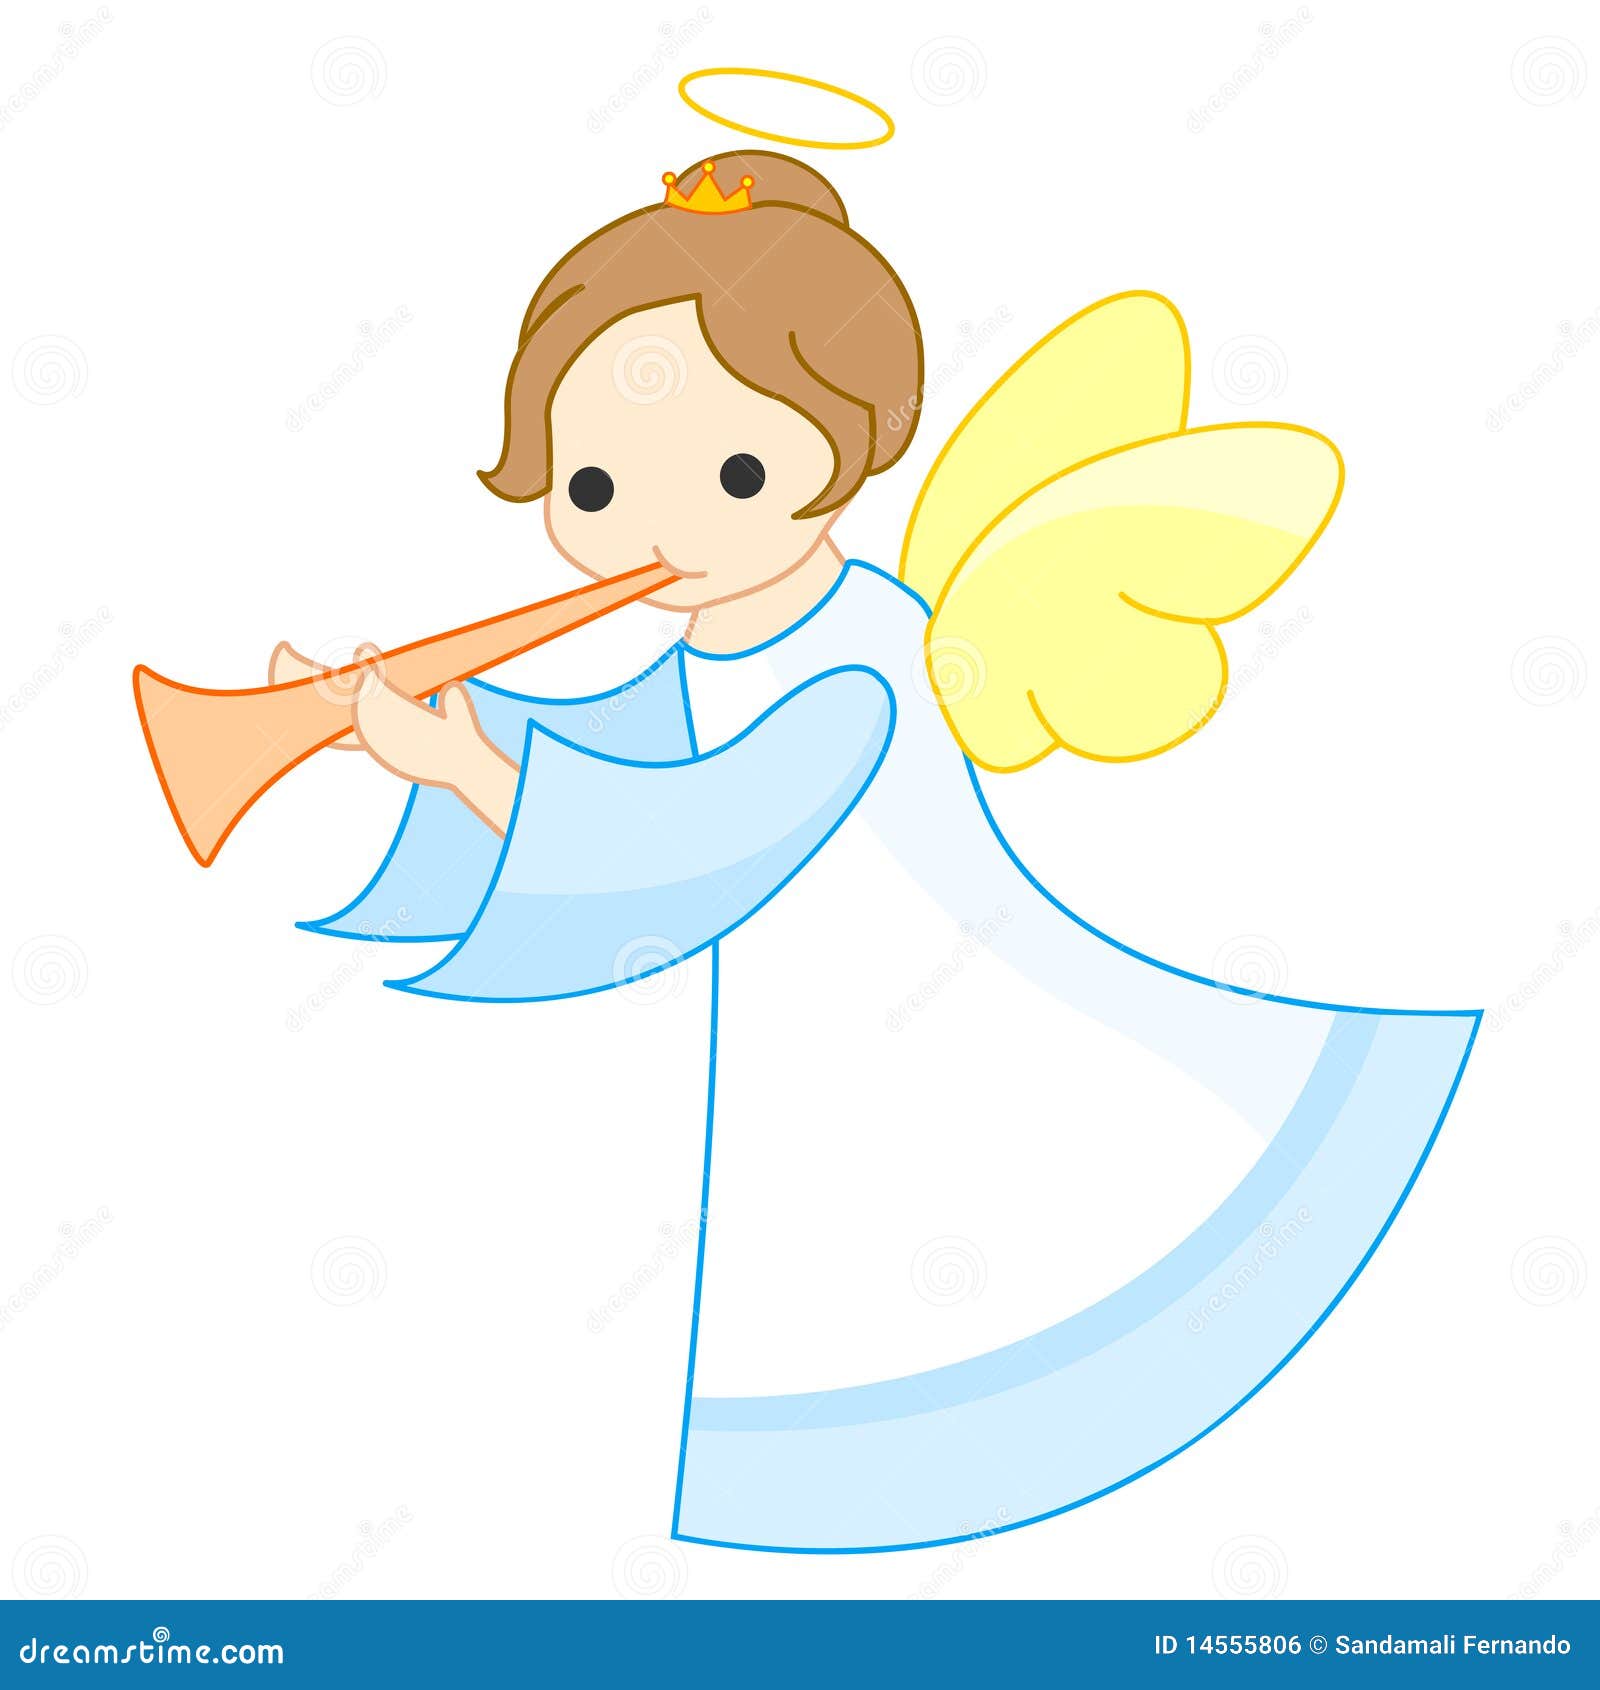 angel vector clipart free - photo #38